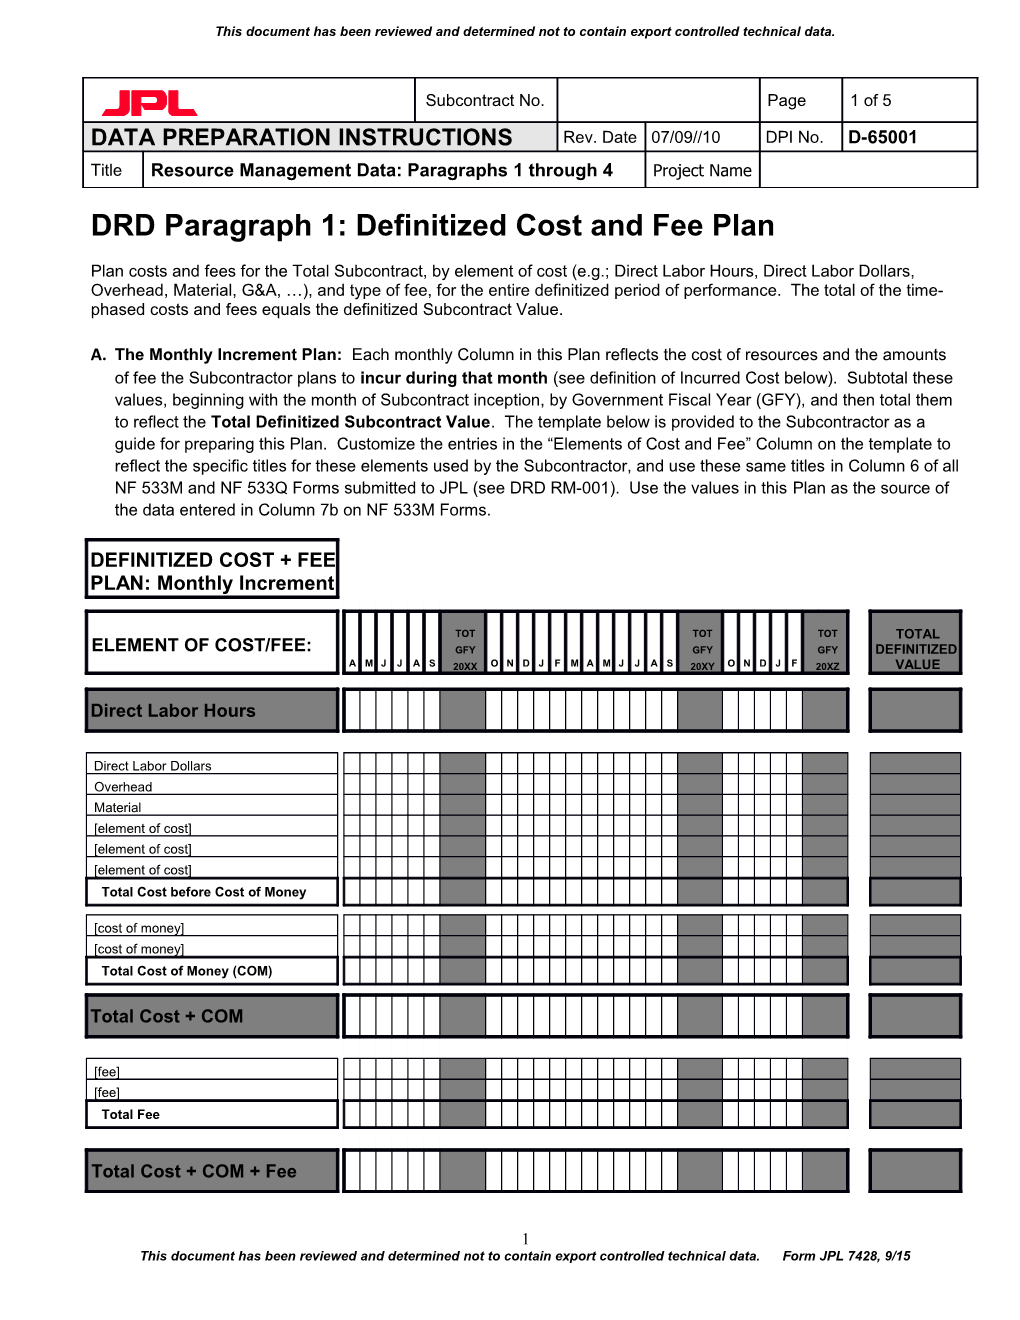 DRD Paragraph 1: Definitized Cost and Fee Plan